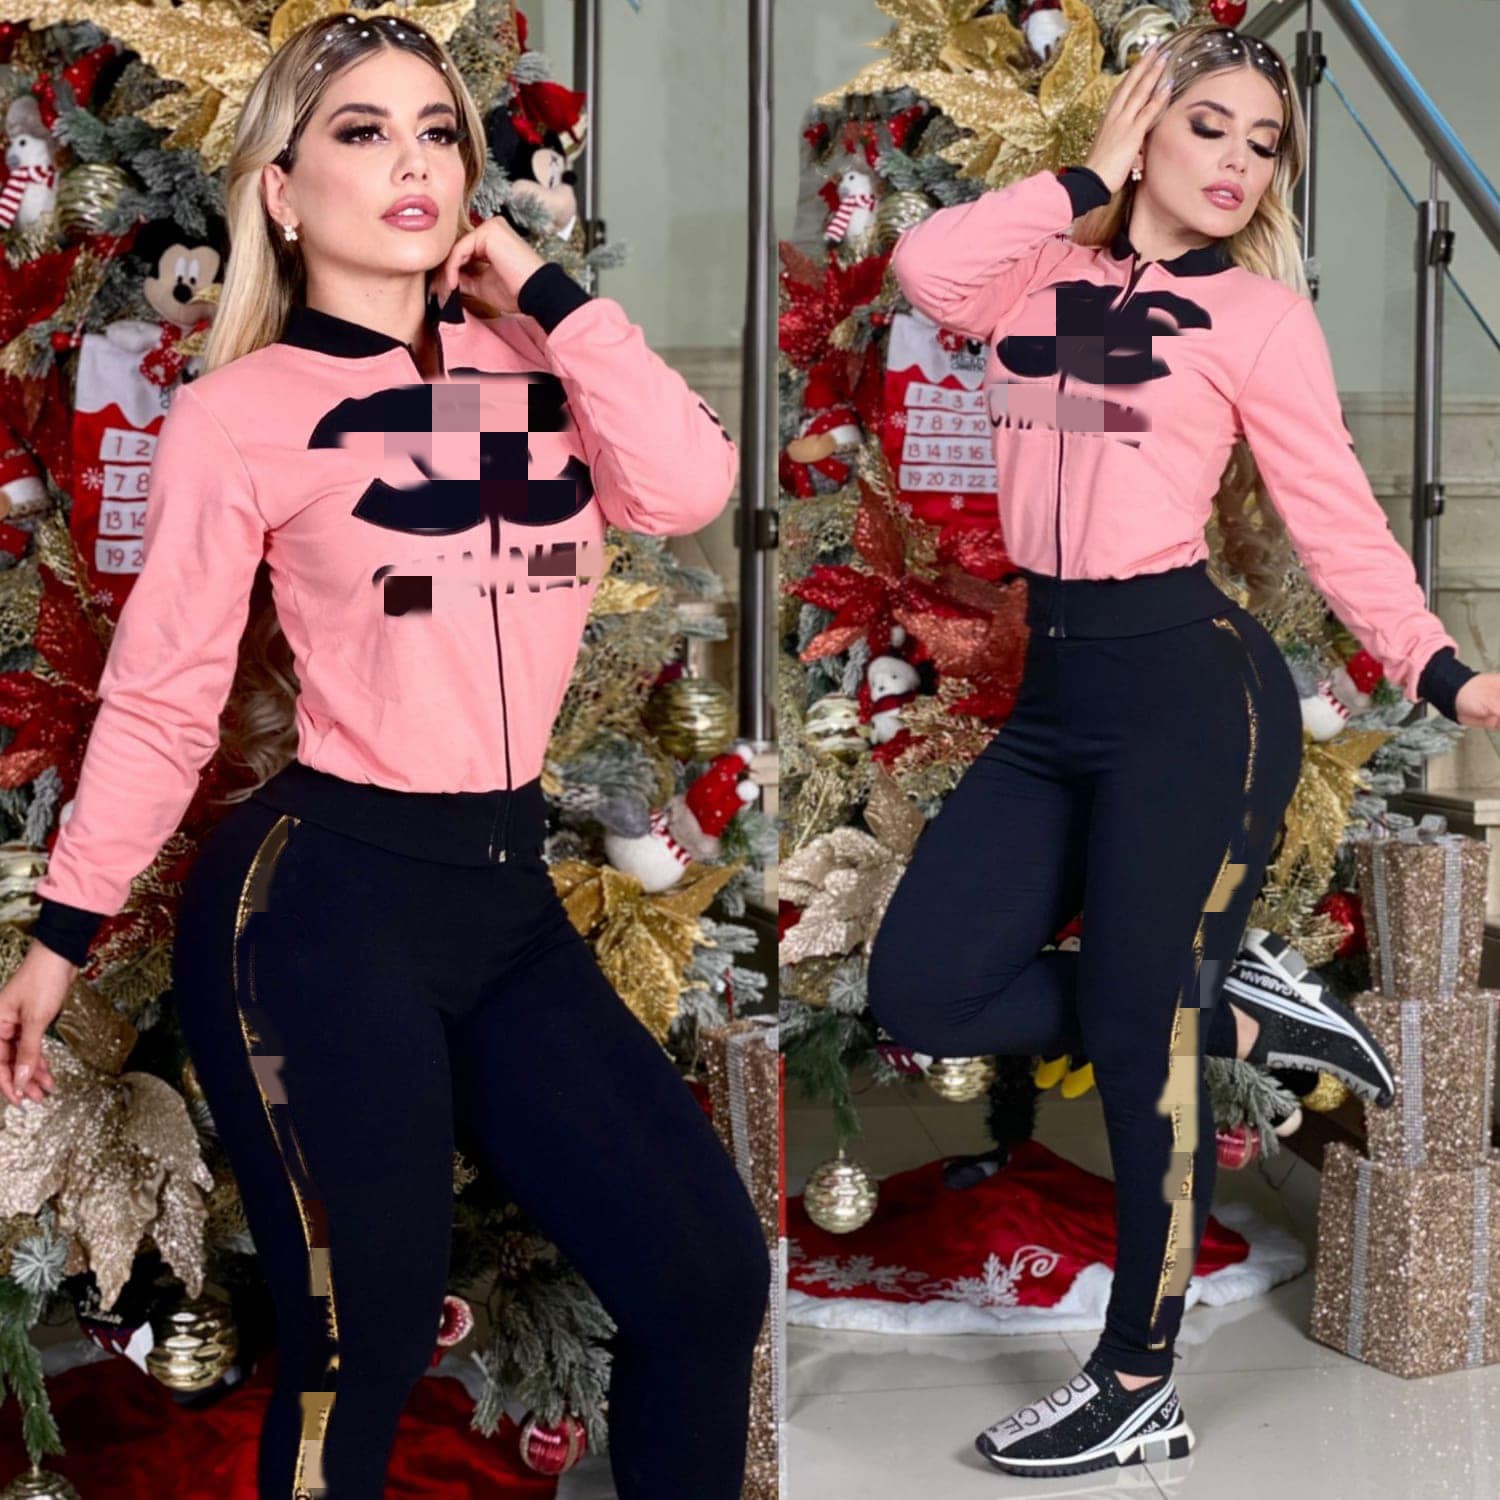 2023 Spring Two Piece Pants Tracksuit Women Outfits Casual Printed Zipper Jacket and Sweatpants Sets Free Ship